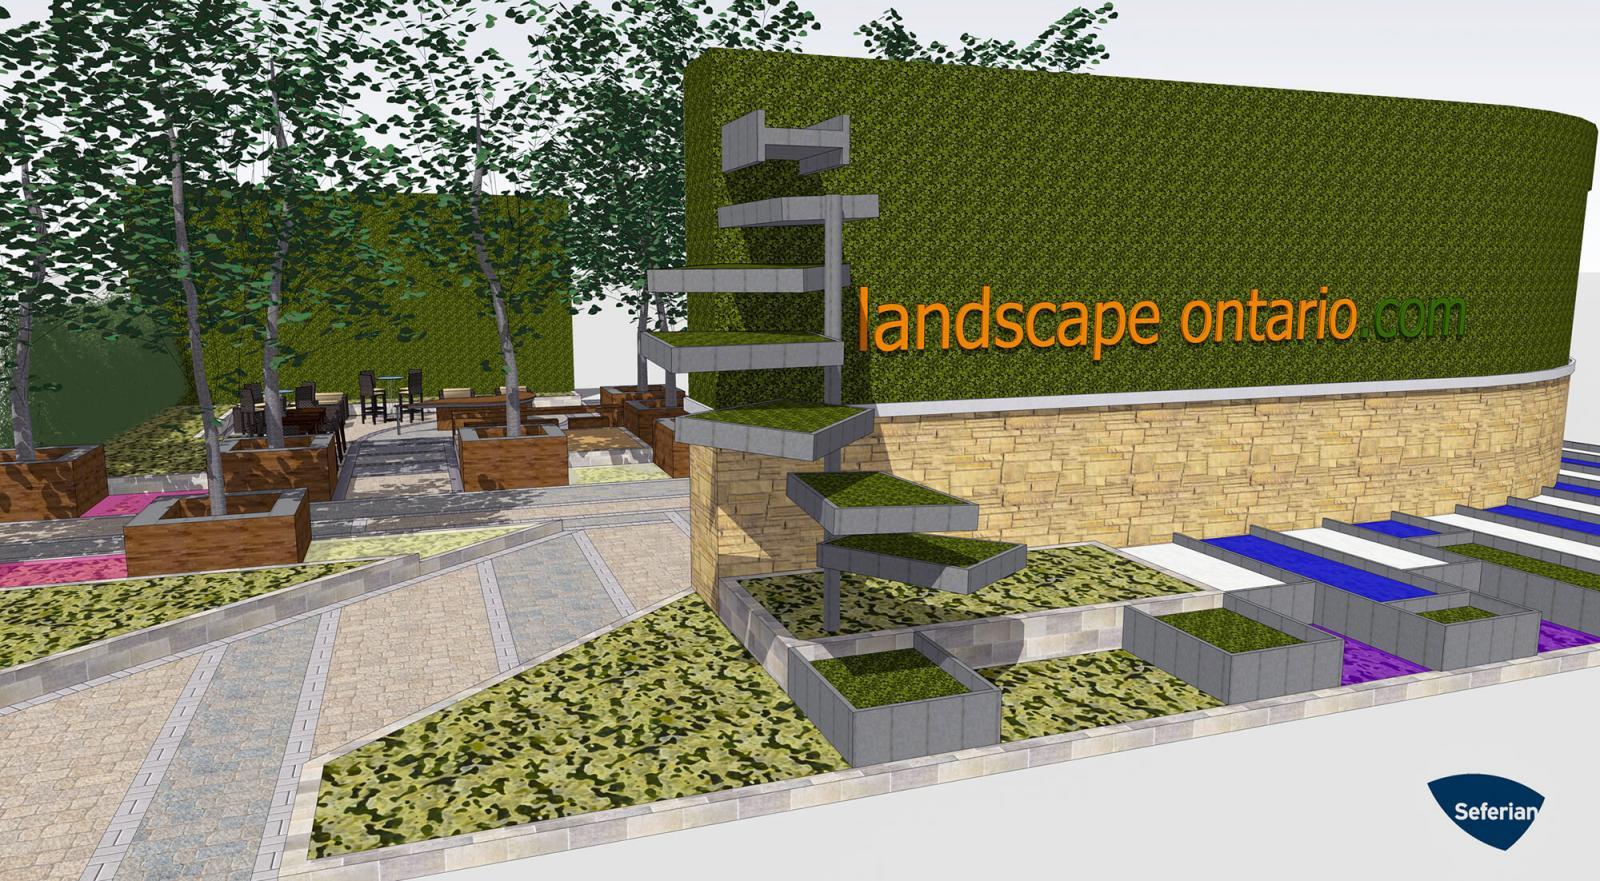 Major changes to Green for Life Garden expected to create a super wow factor